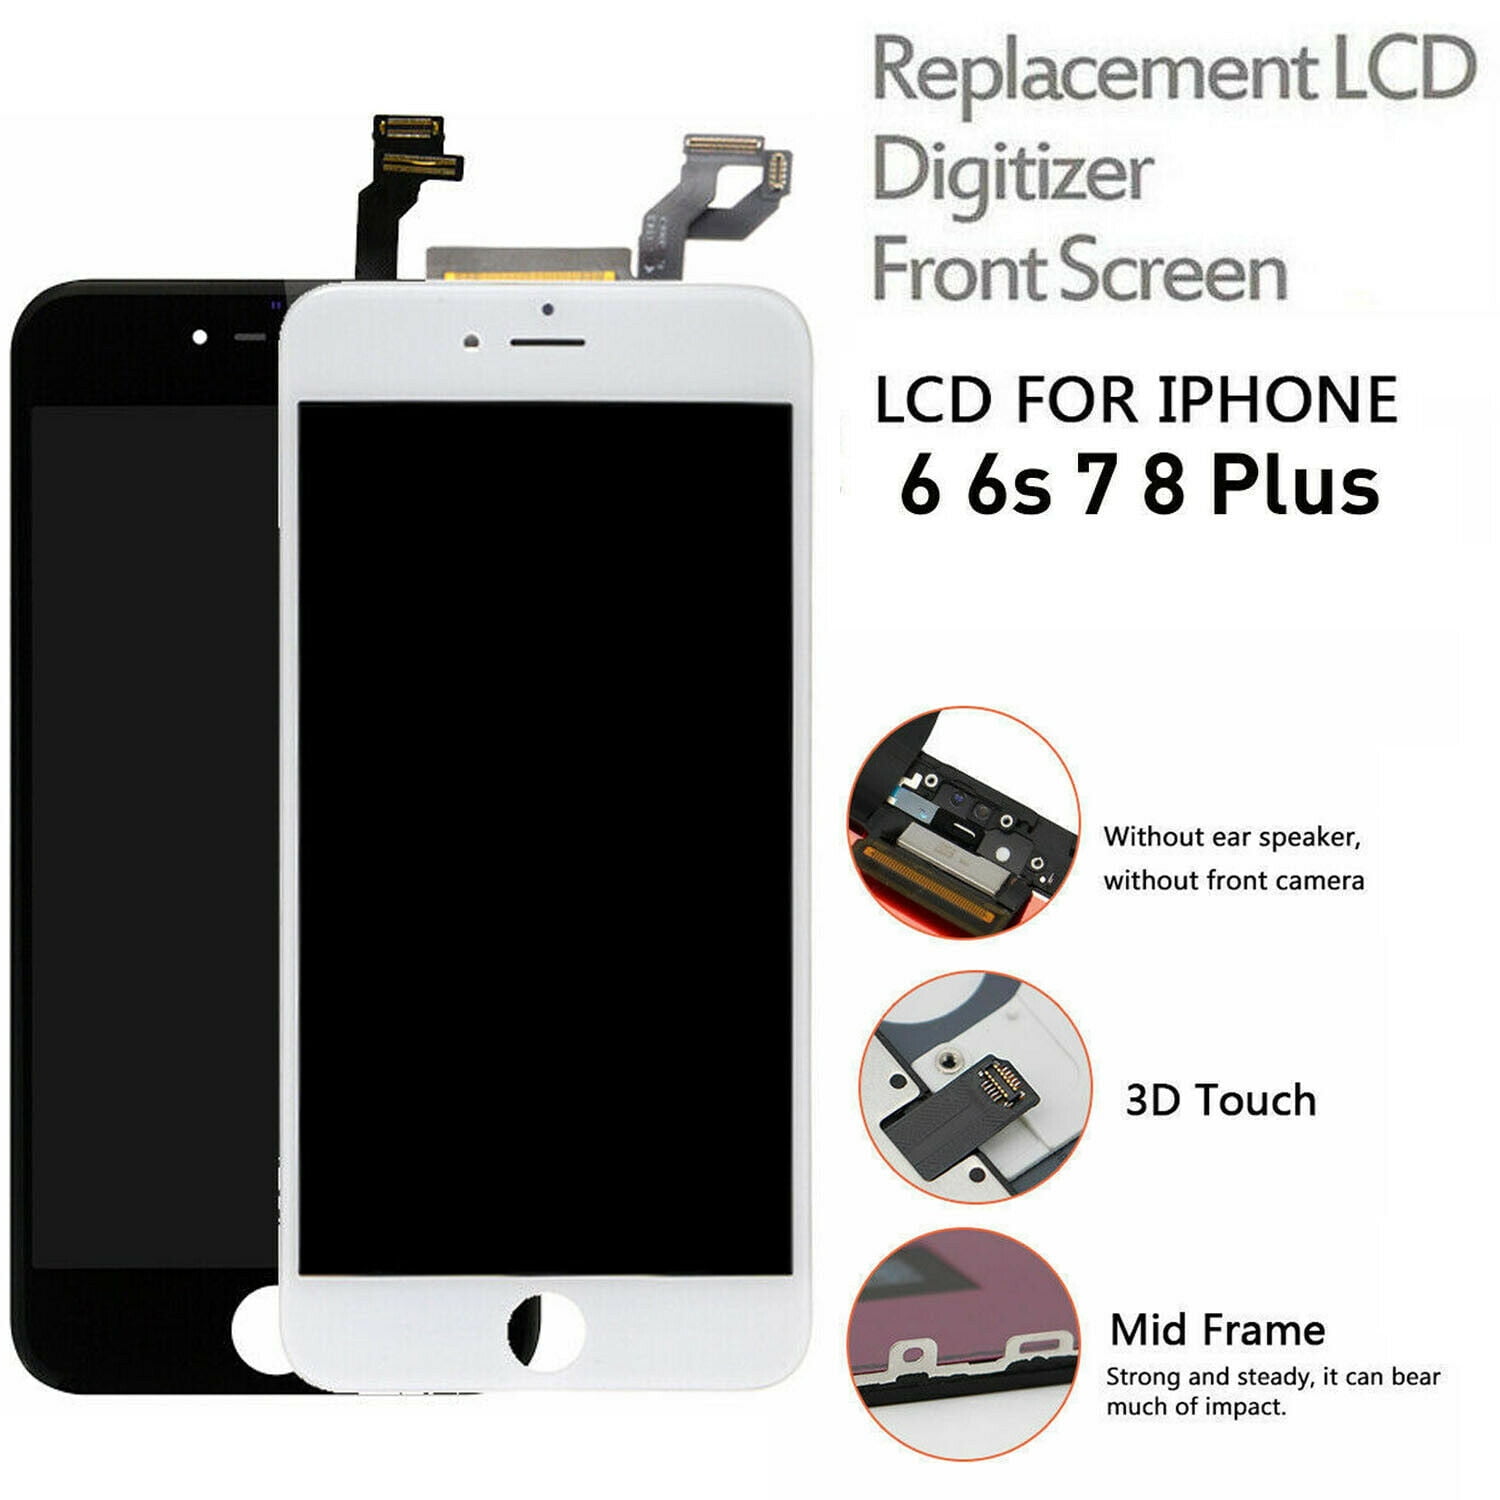 Suyo puente Énfasis For iPhone 6 Plus (5.5 Inch) (A1522, A1524, A1593)Screen Replacement LCD  Digitizer Assembly Touchscreen Front Glass White with Free Tools -  Walmart.com